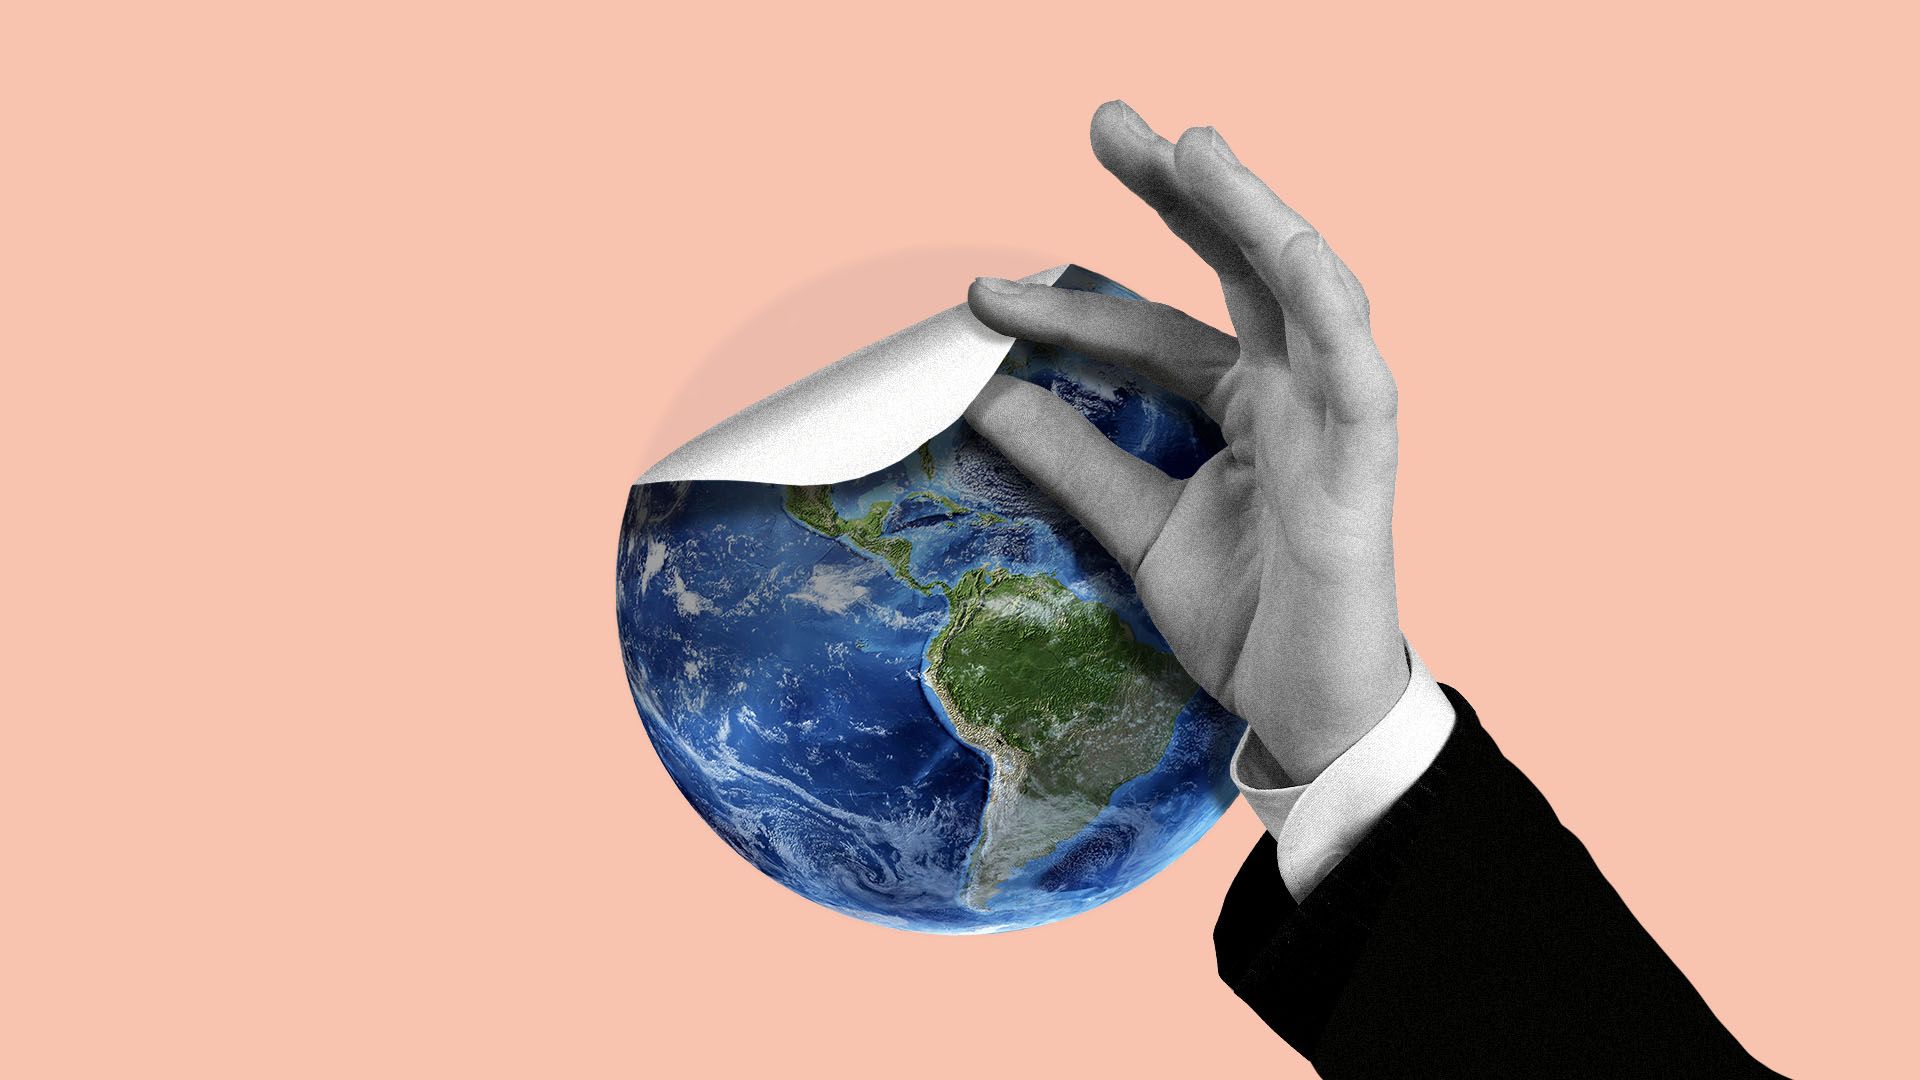 Illustration of a hand in a suit peeling back a sticker of the earth